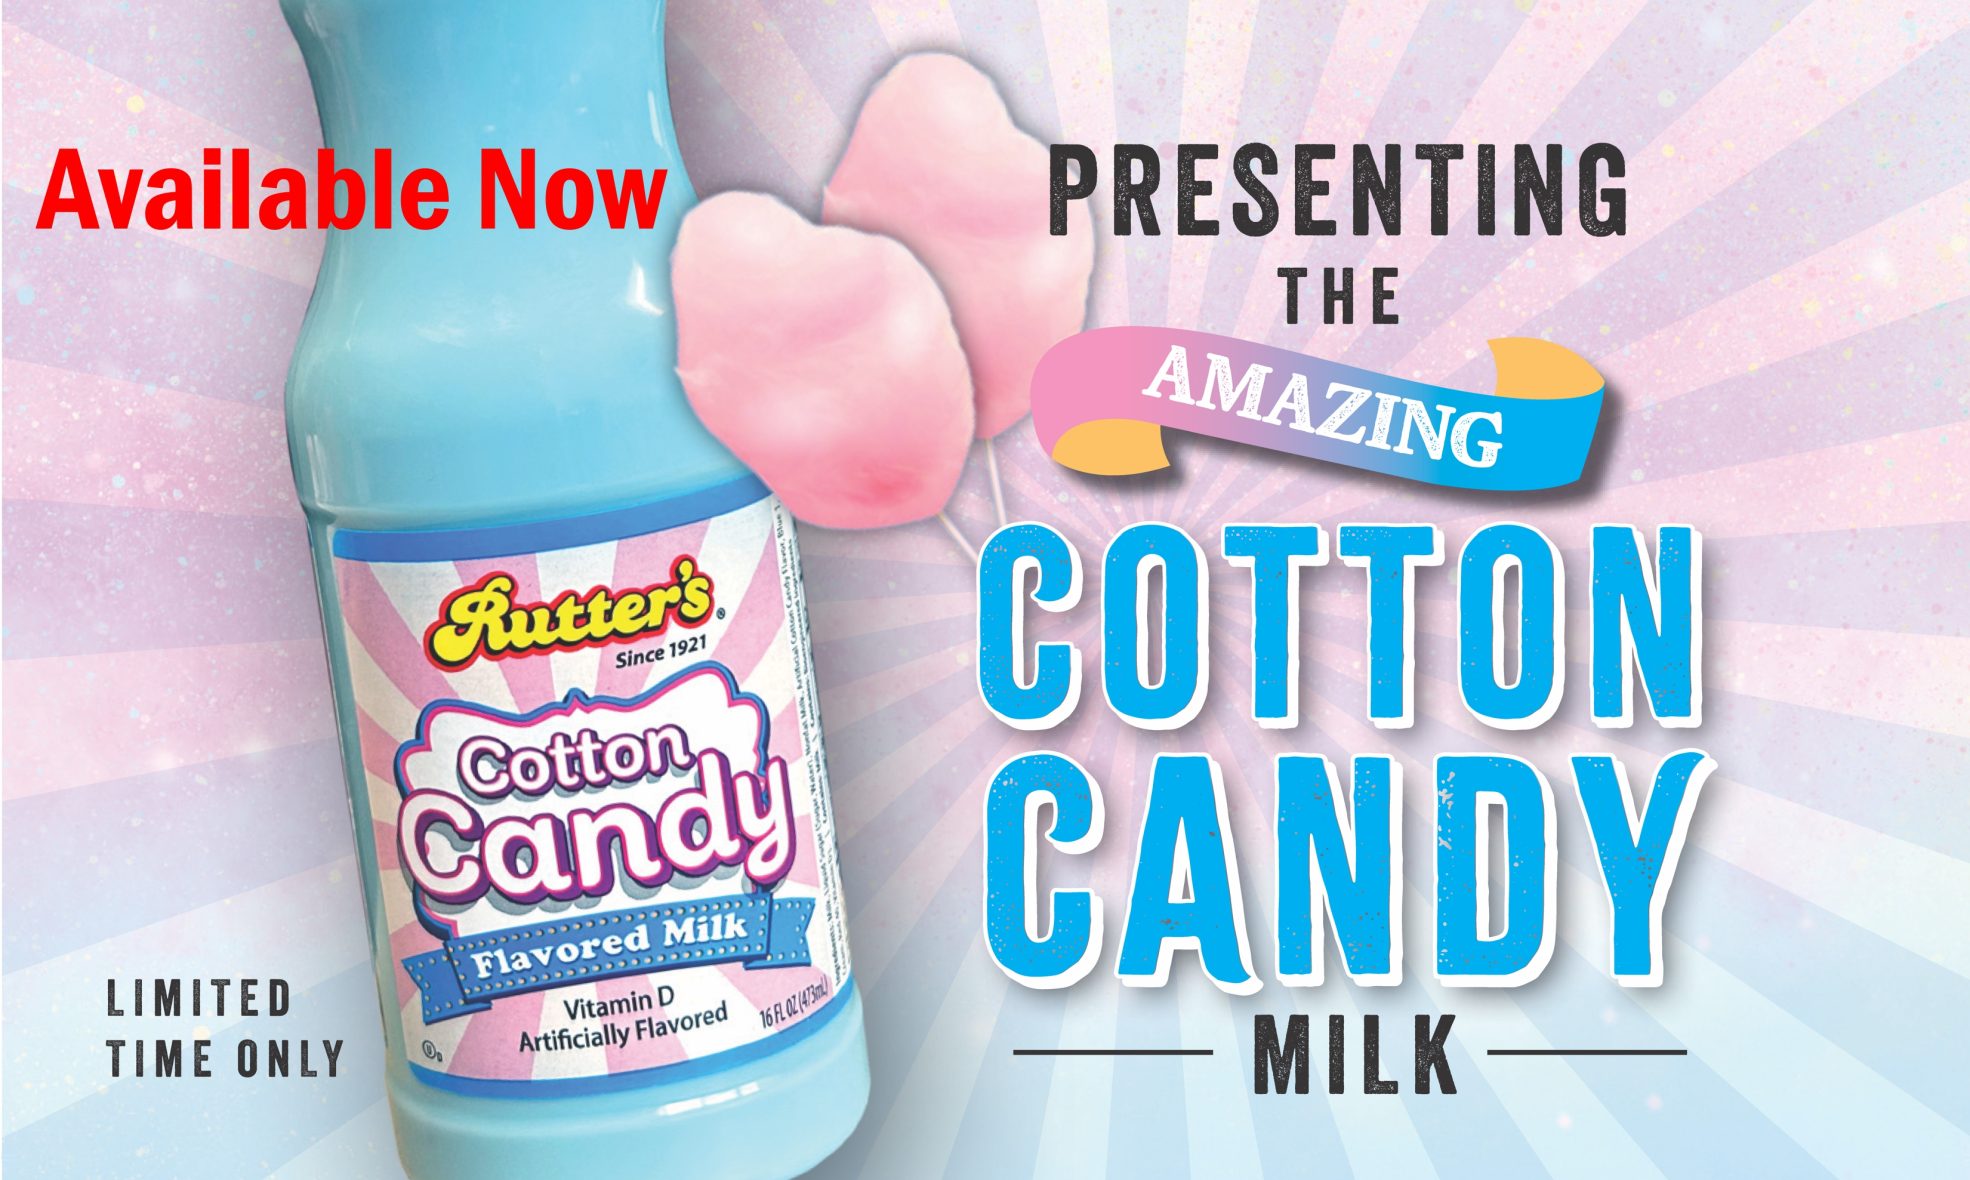 Limited Offer - Cotton Candy Flavored Milk